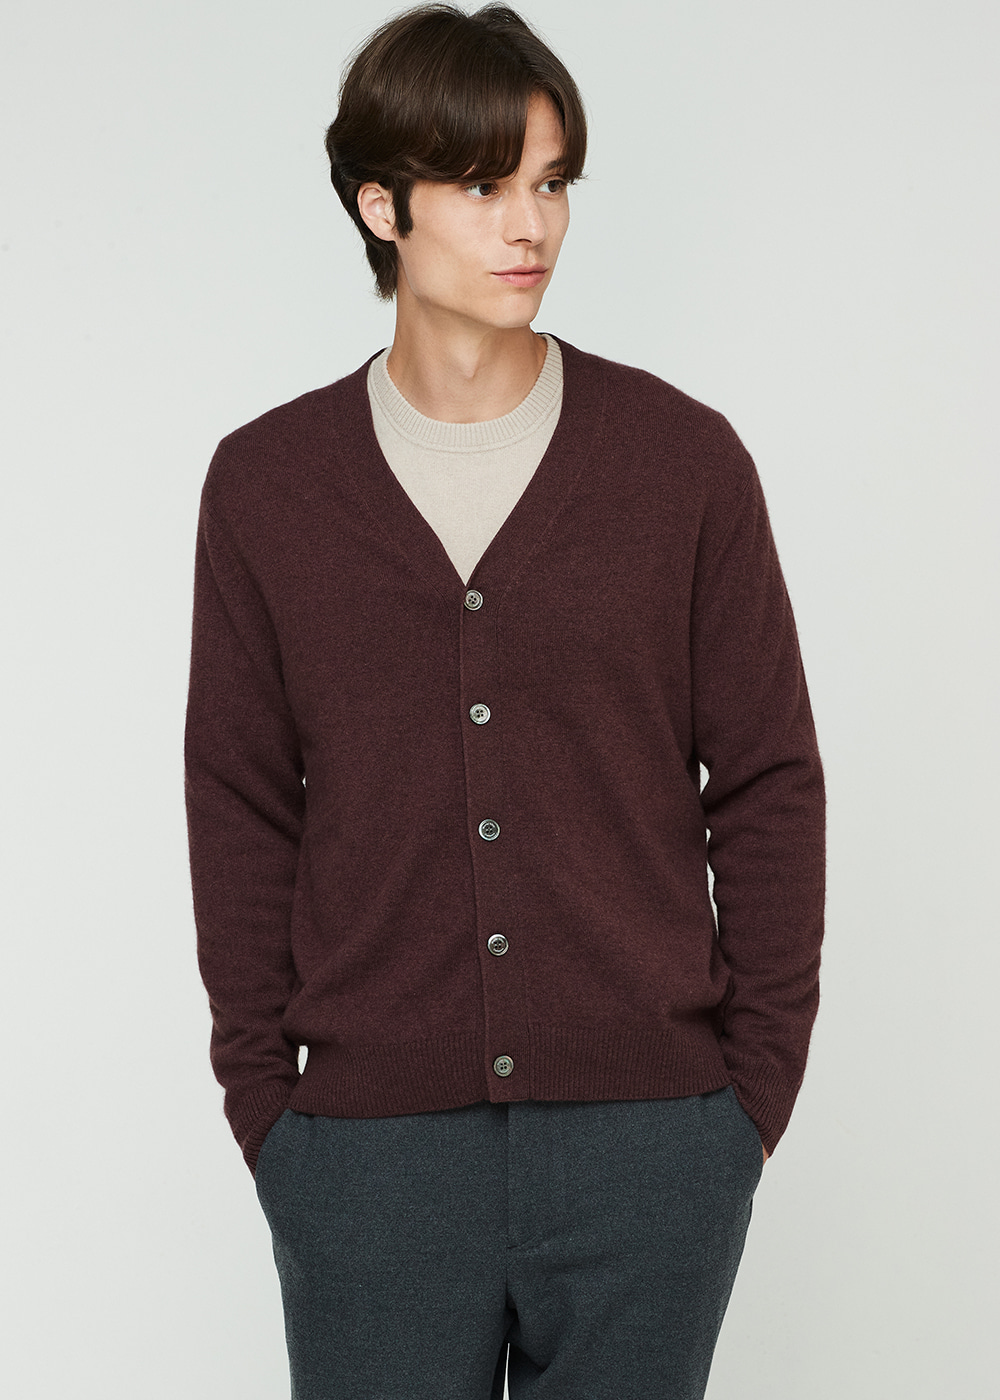 A LOGO smart fit cardigan (squirre)  20%